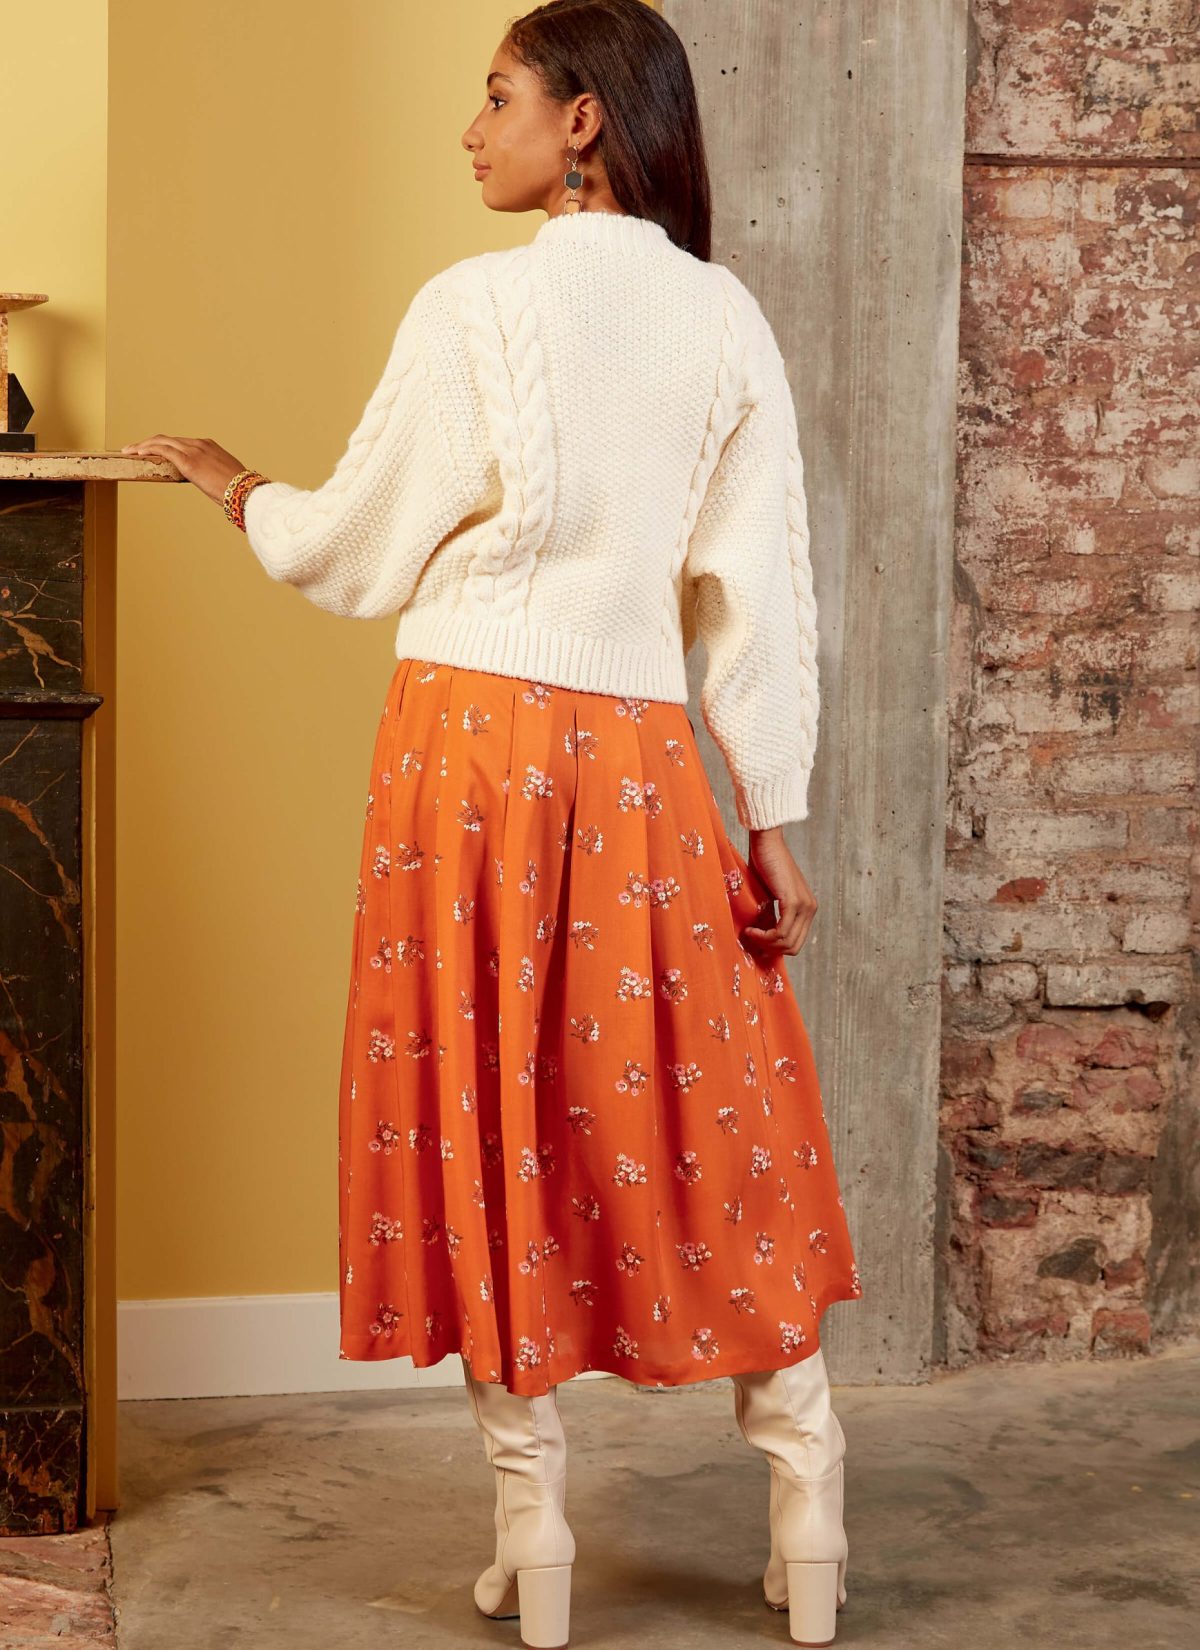 McCall's Sewing Pattern M8248 Misses' Skirts